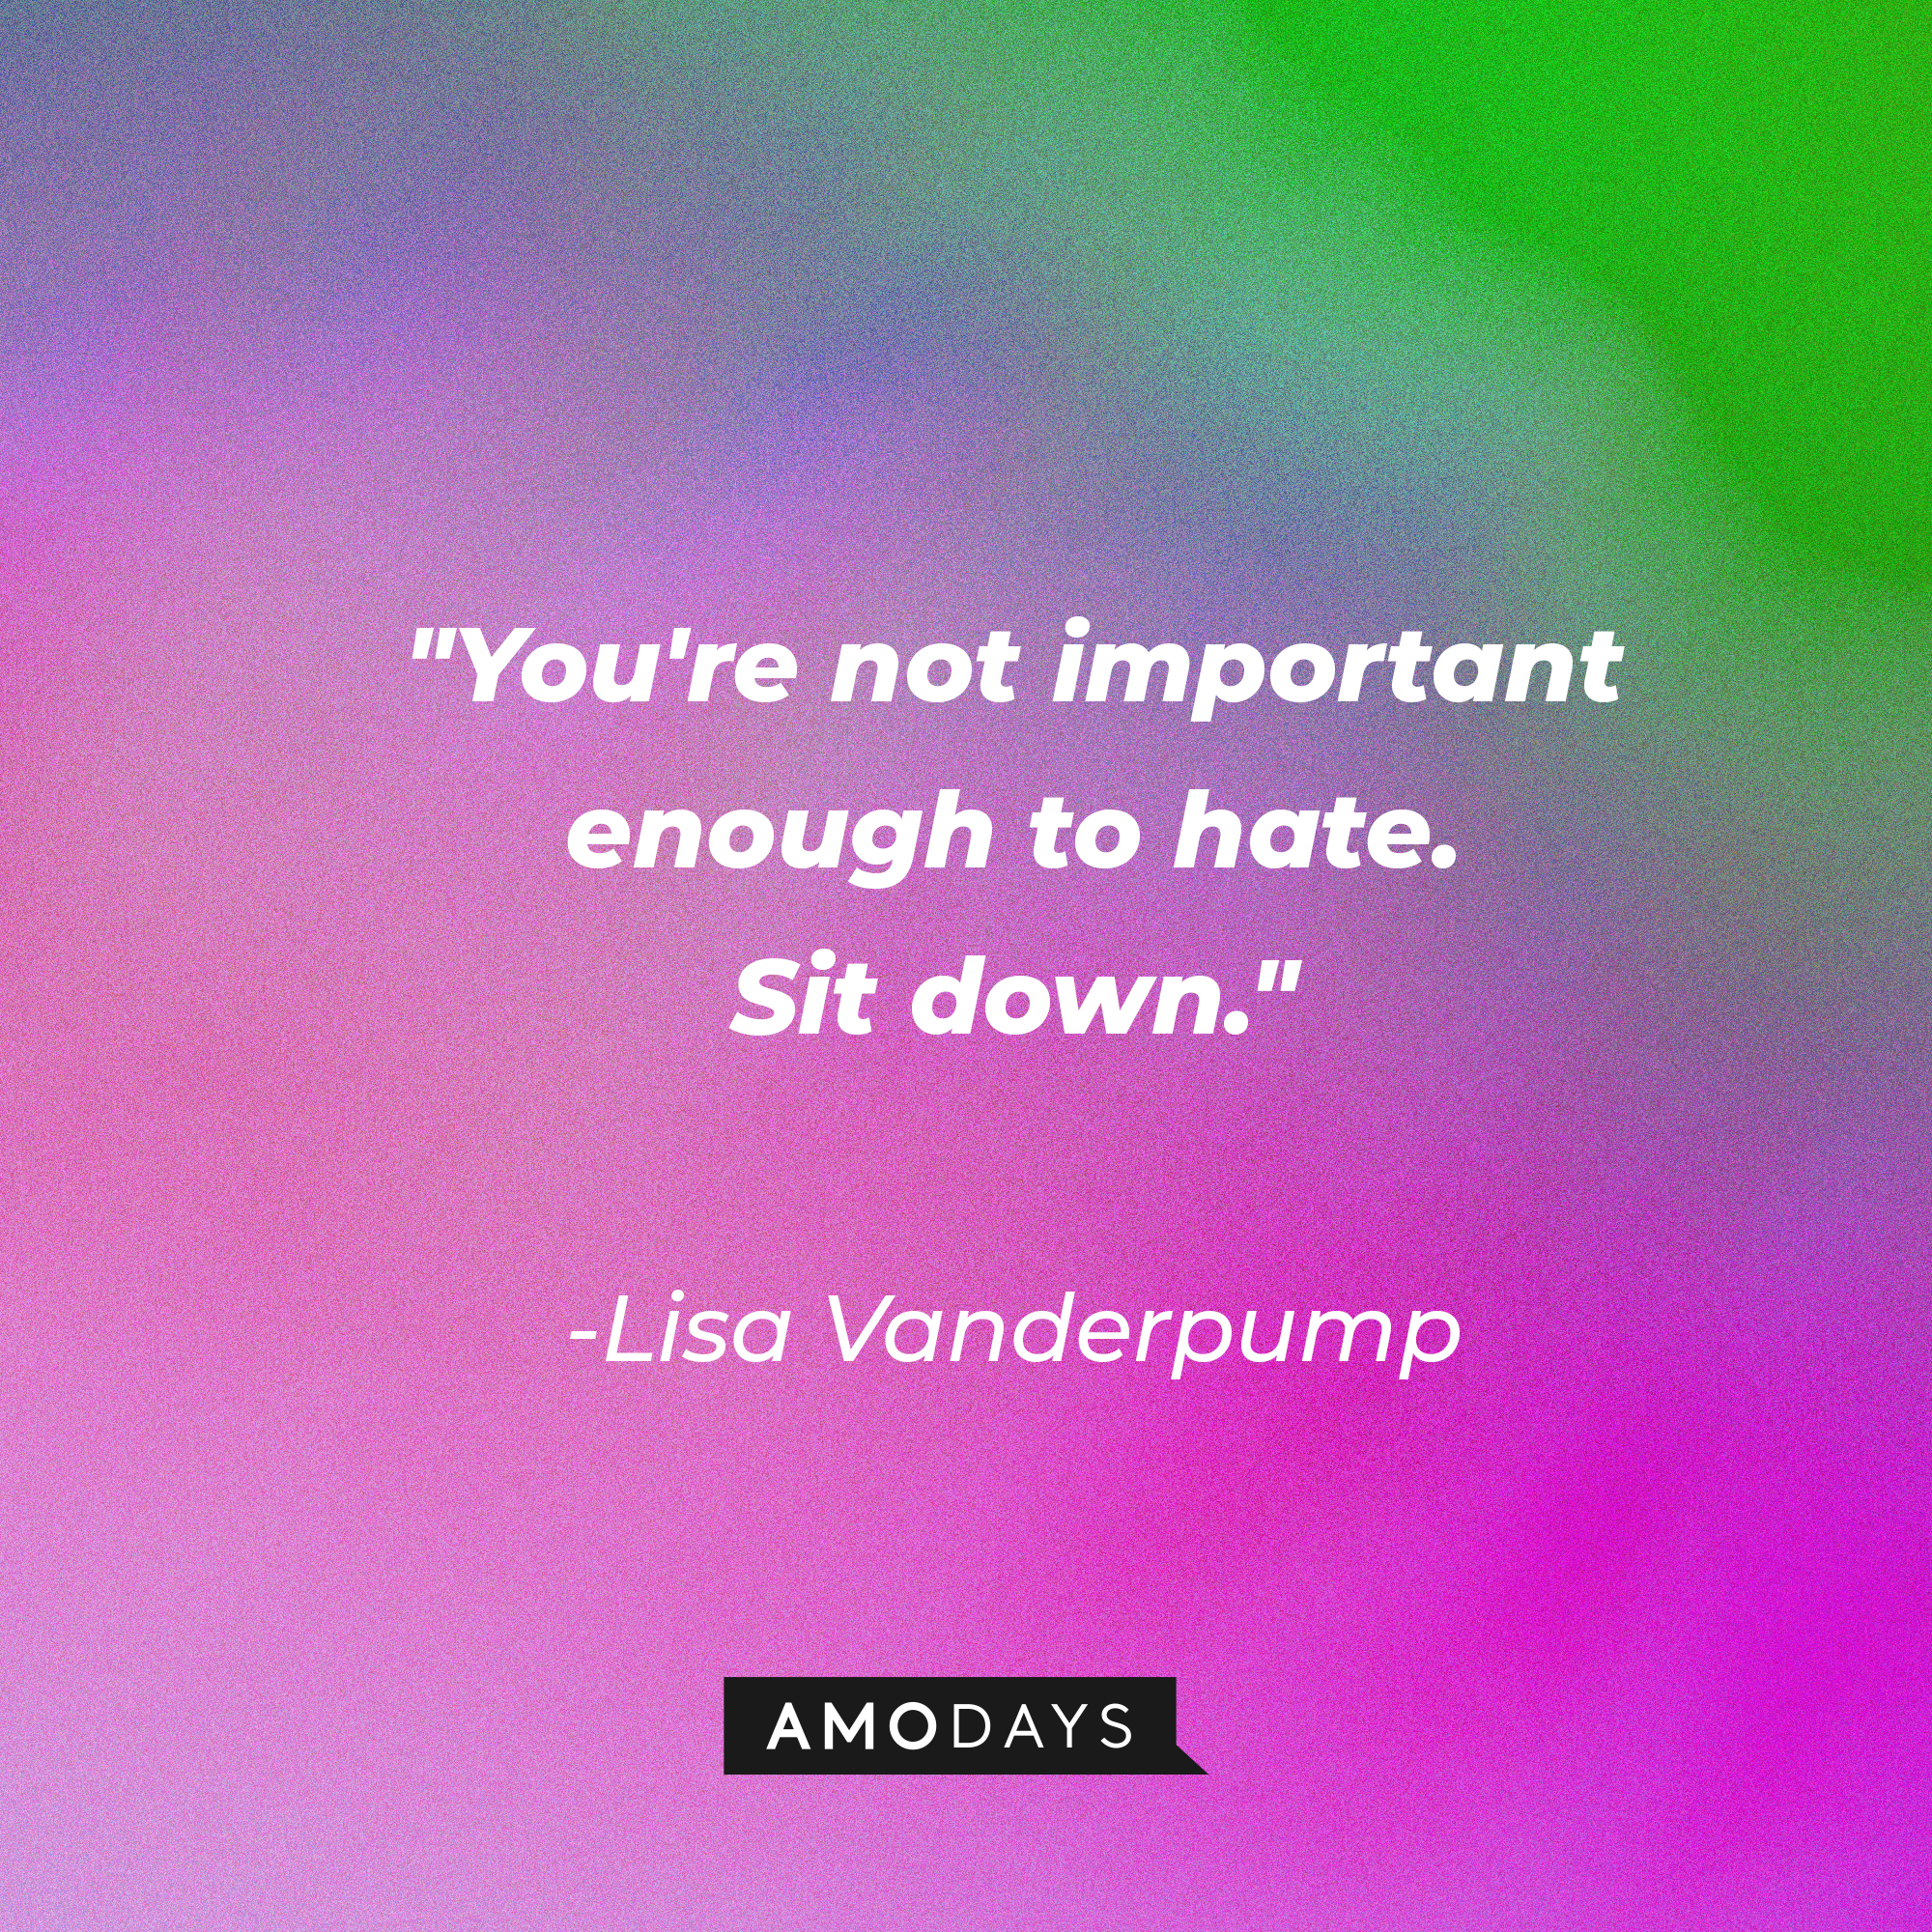 Lisa Vanderpump’s quote: "You're not important enough to hate. Sit down." | Source: AmoDays